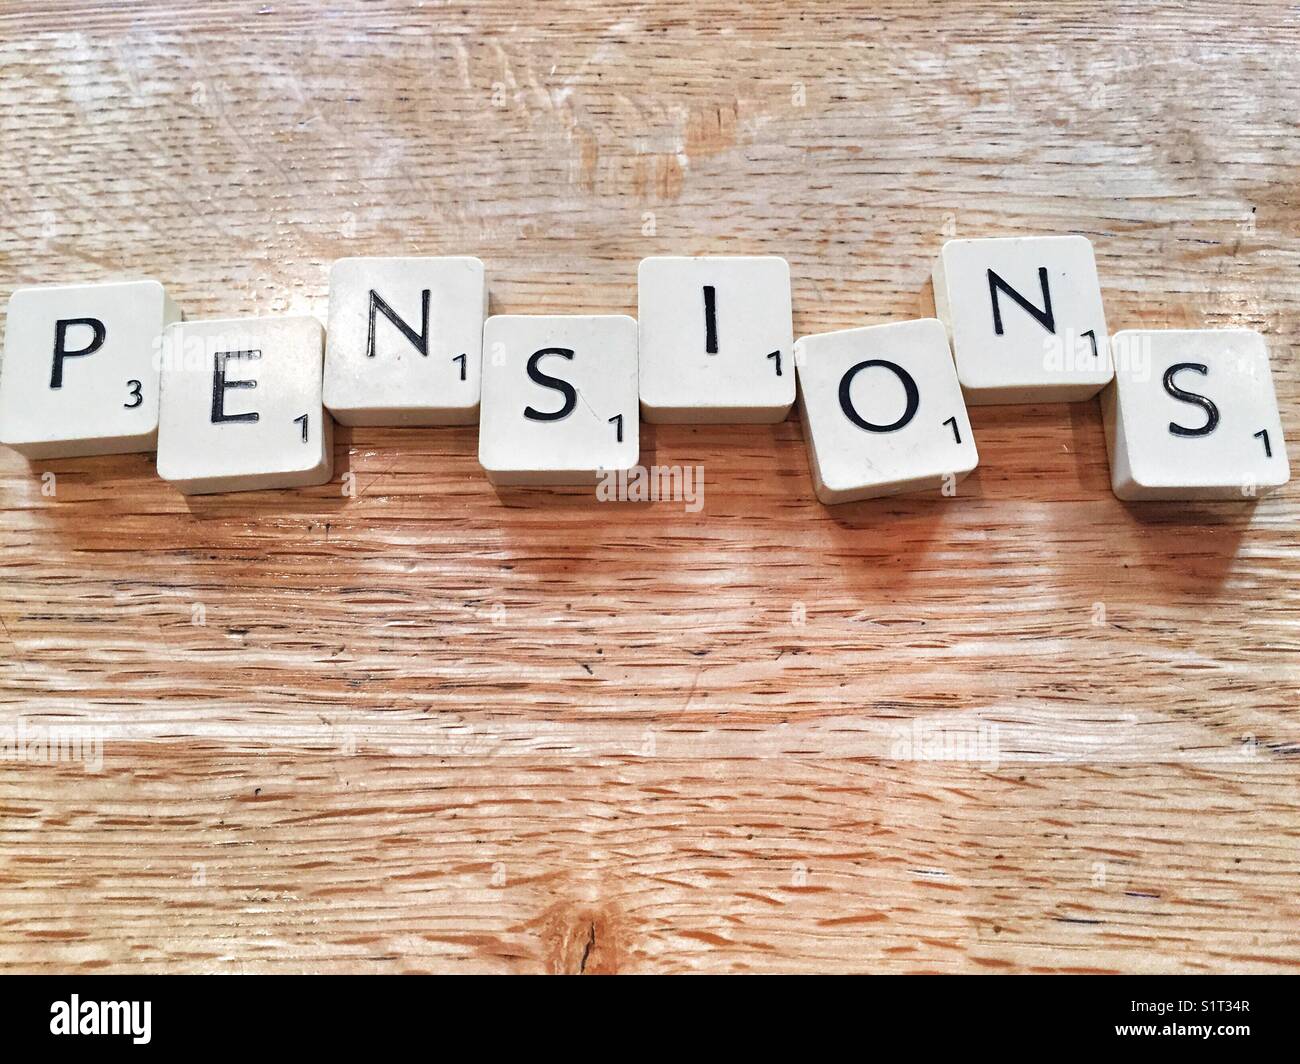 The word pensions written with scrabble tiles Stock Photo